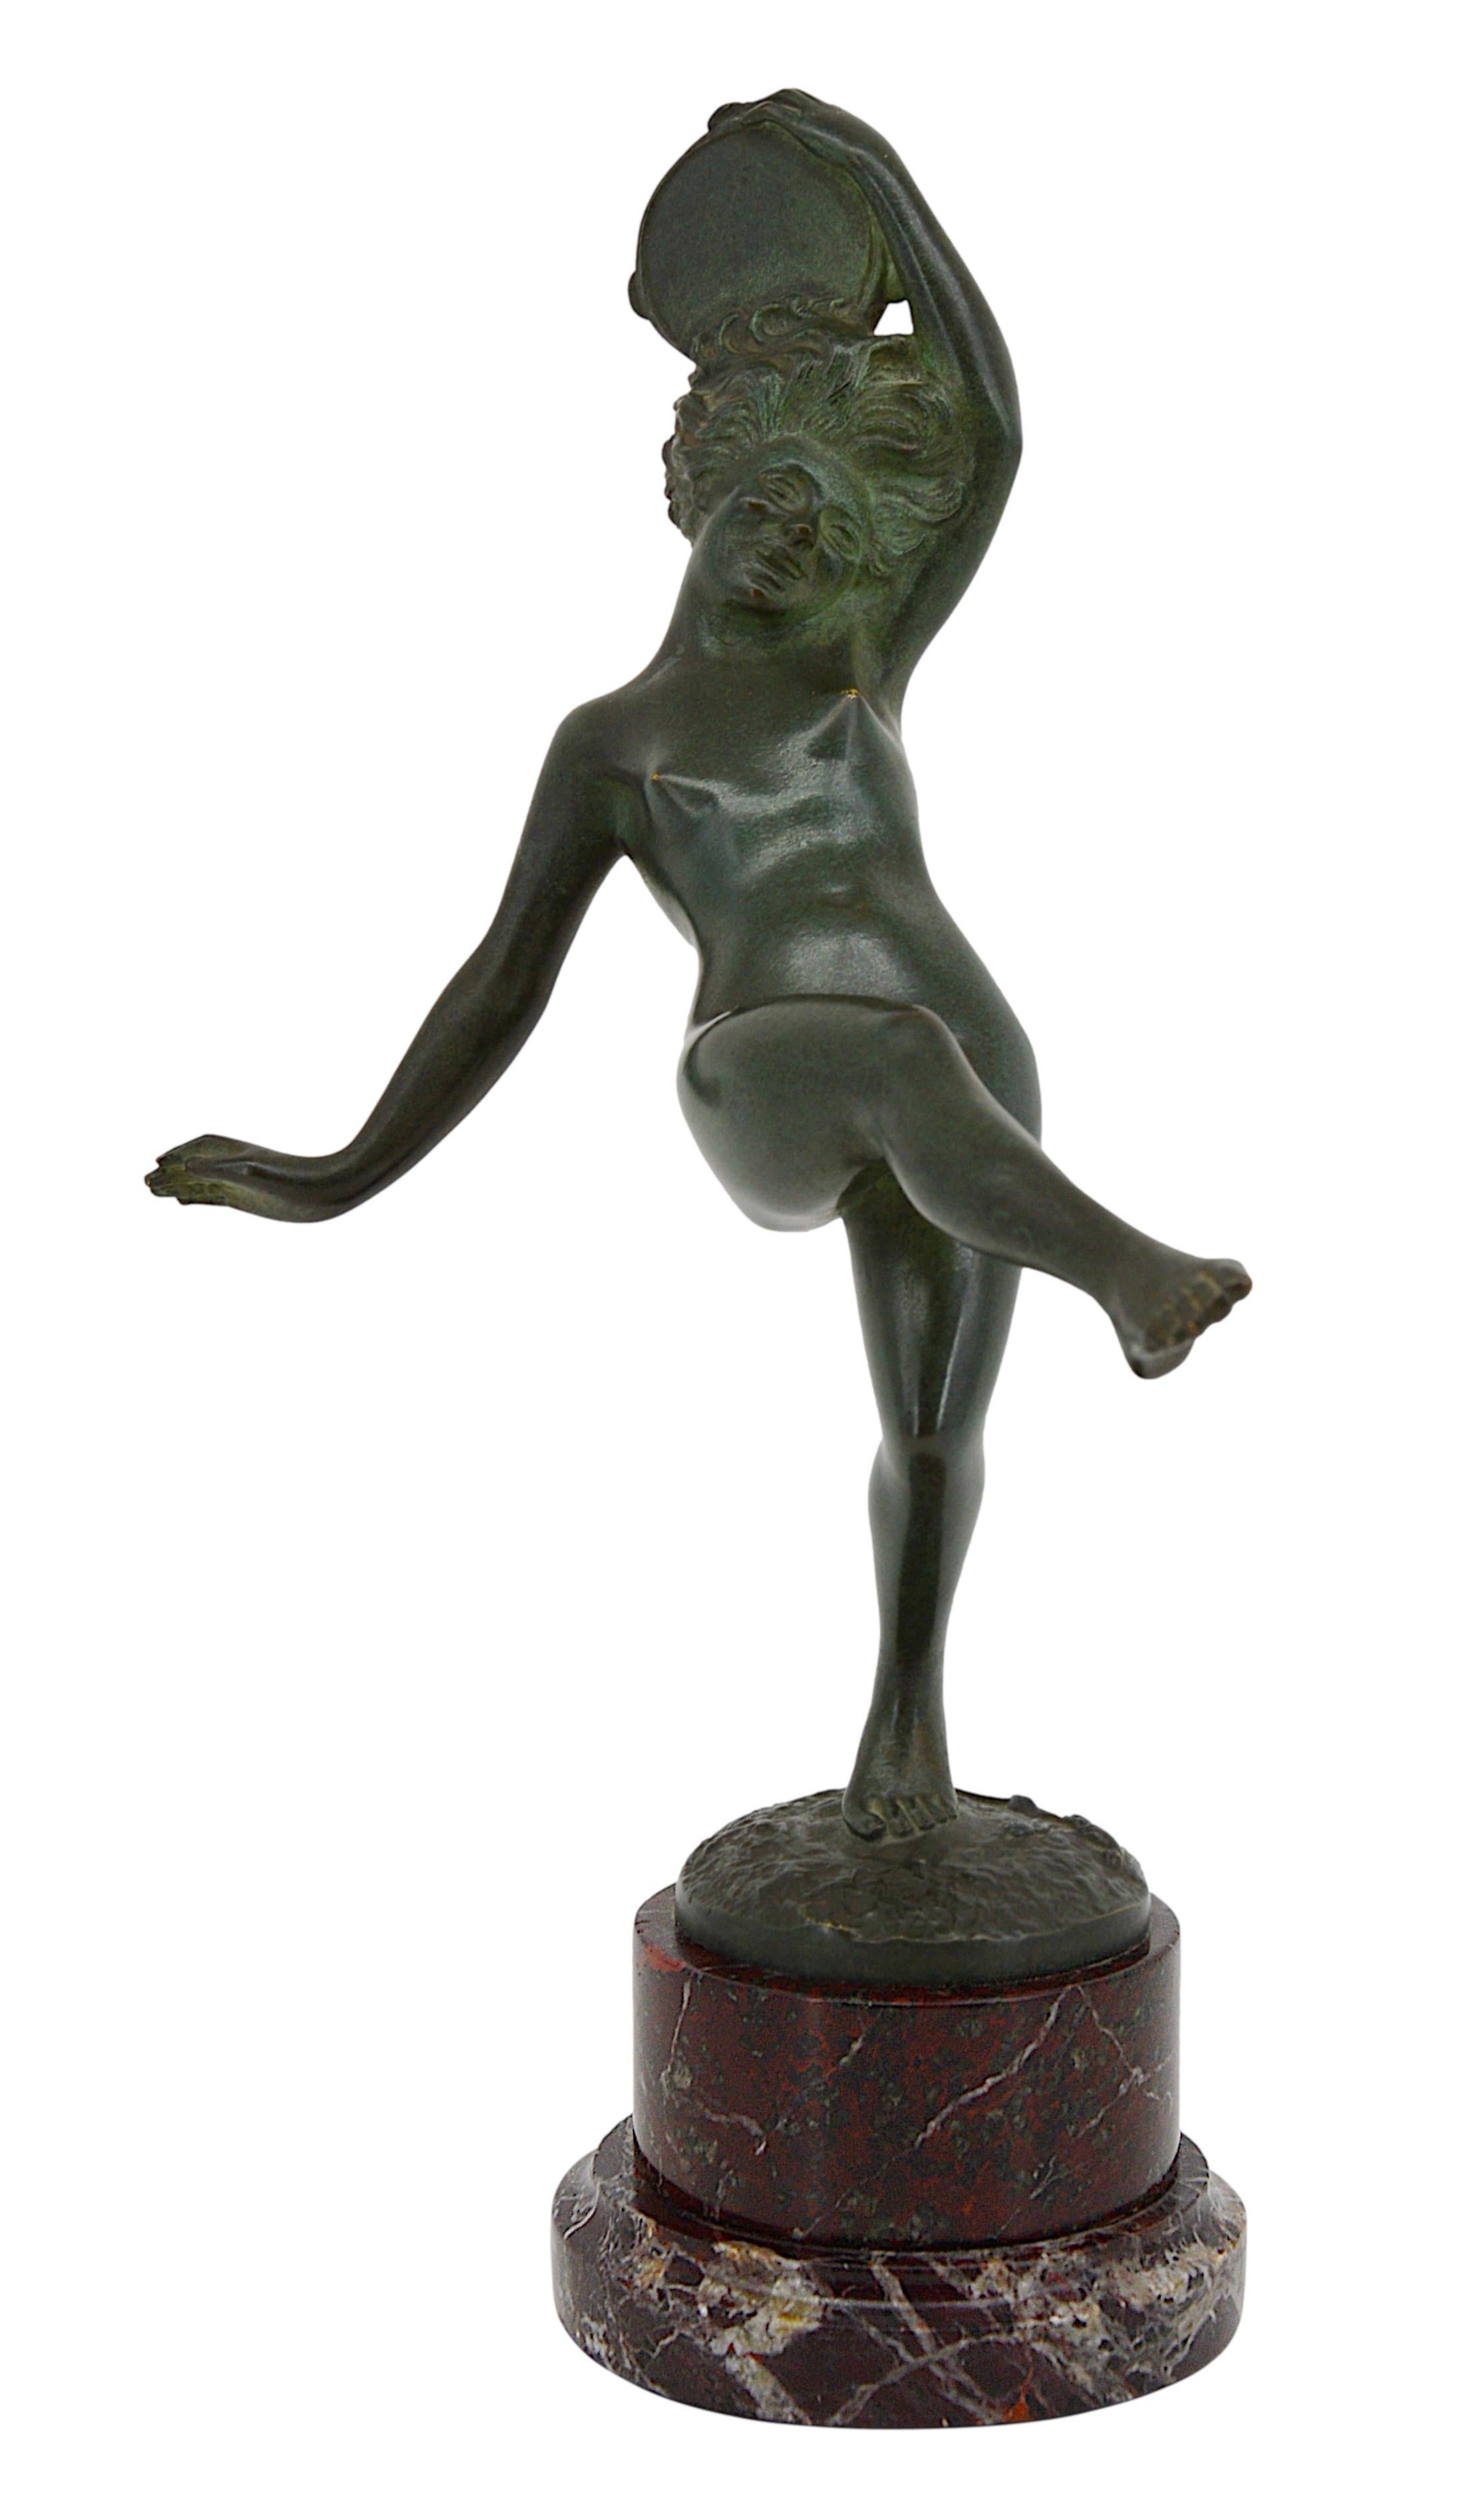 Genuine French Art Deco sculpture by Robert Bousquet, France, late 1910s. 